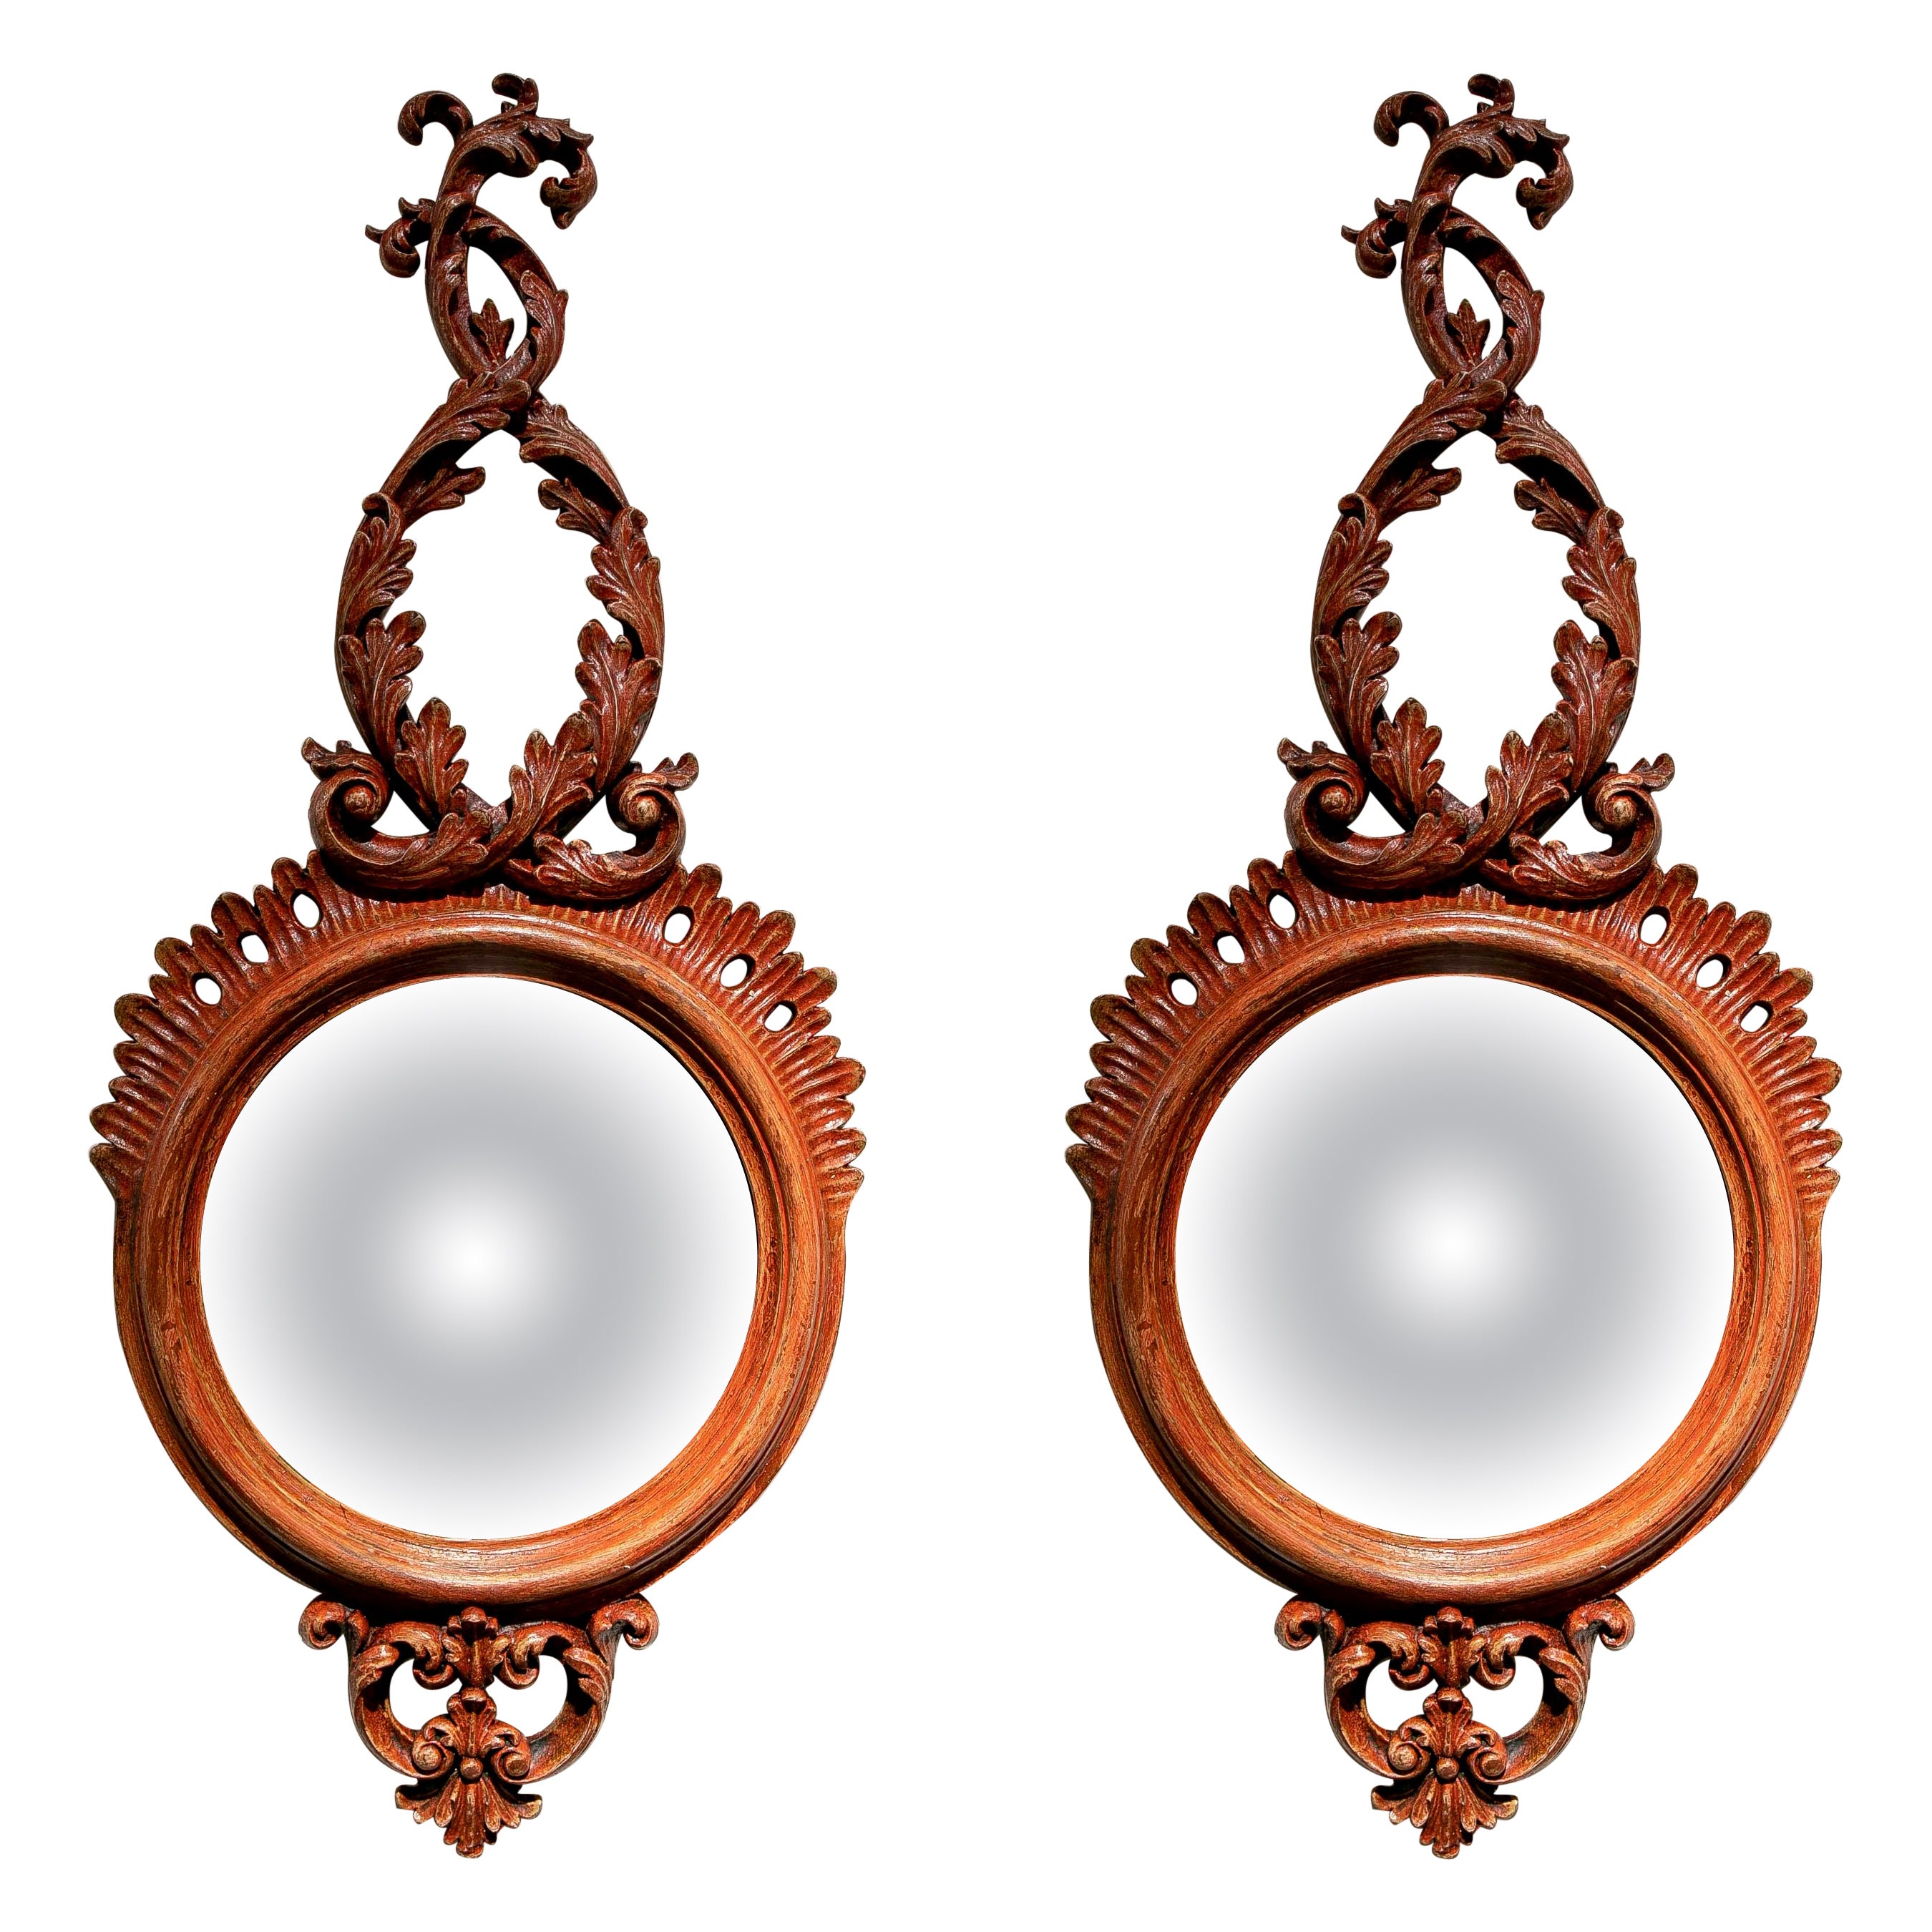 Pair of Polychromed Rounds Wall Mirrors in Shades of Red